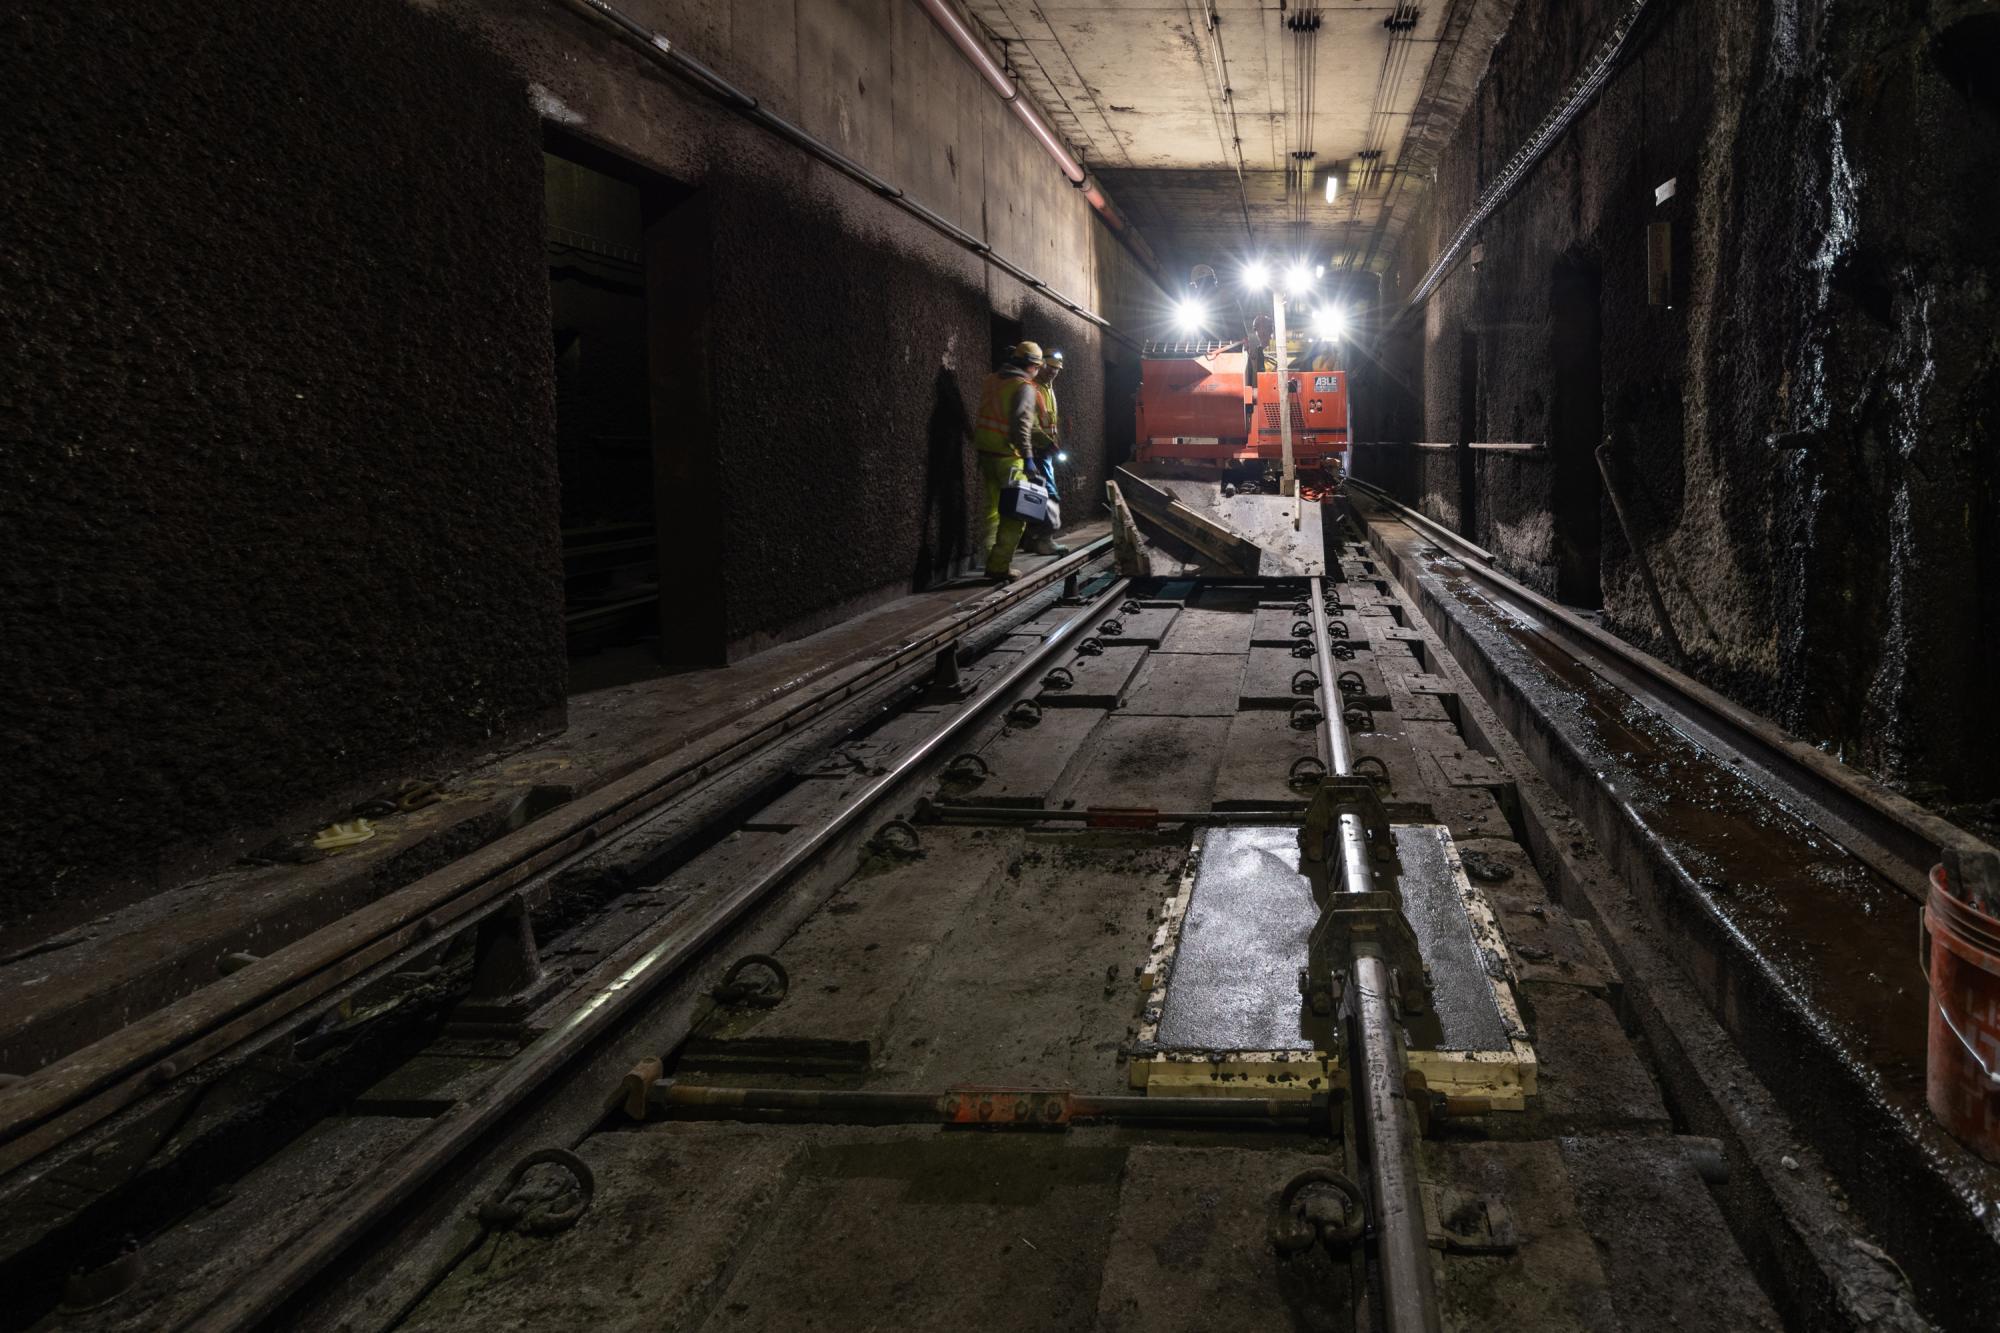 A crew works on maintenance in a tunnel